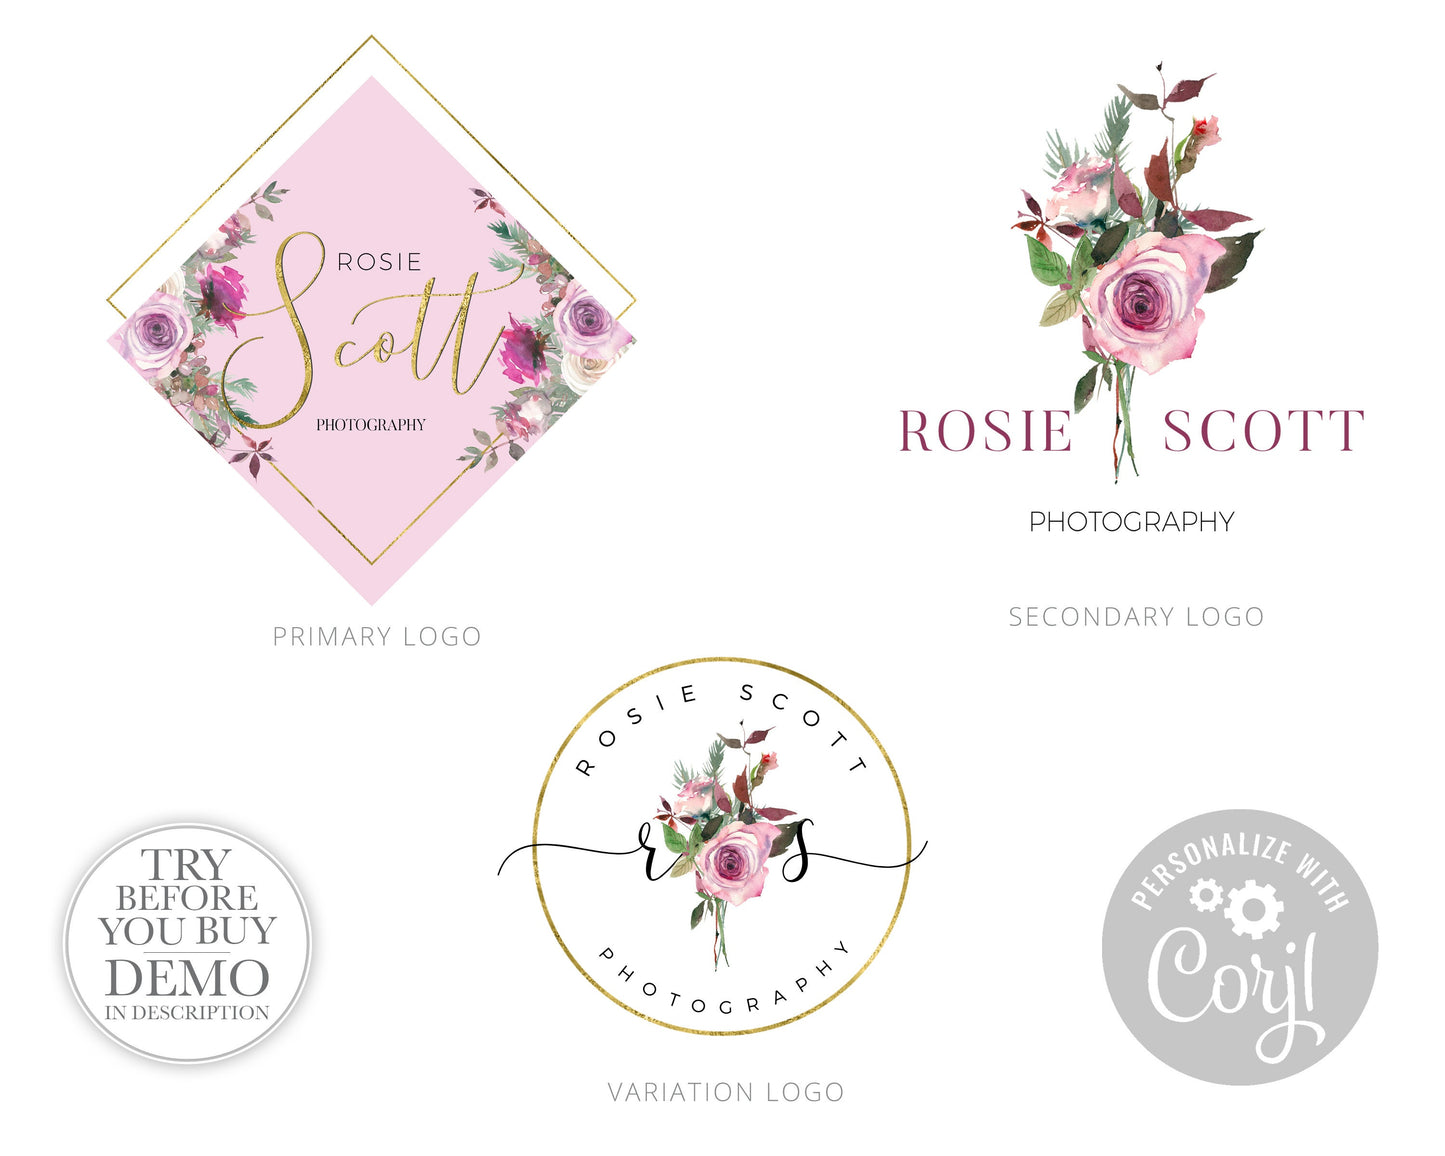 8pc Maxi Branding Package Instant Edit & Download Geometric and Watercolor Floral  | Edit Yourself Online! | Premade Business logo RS-001